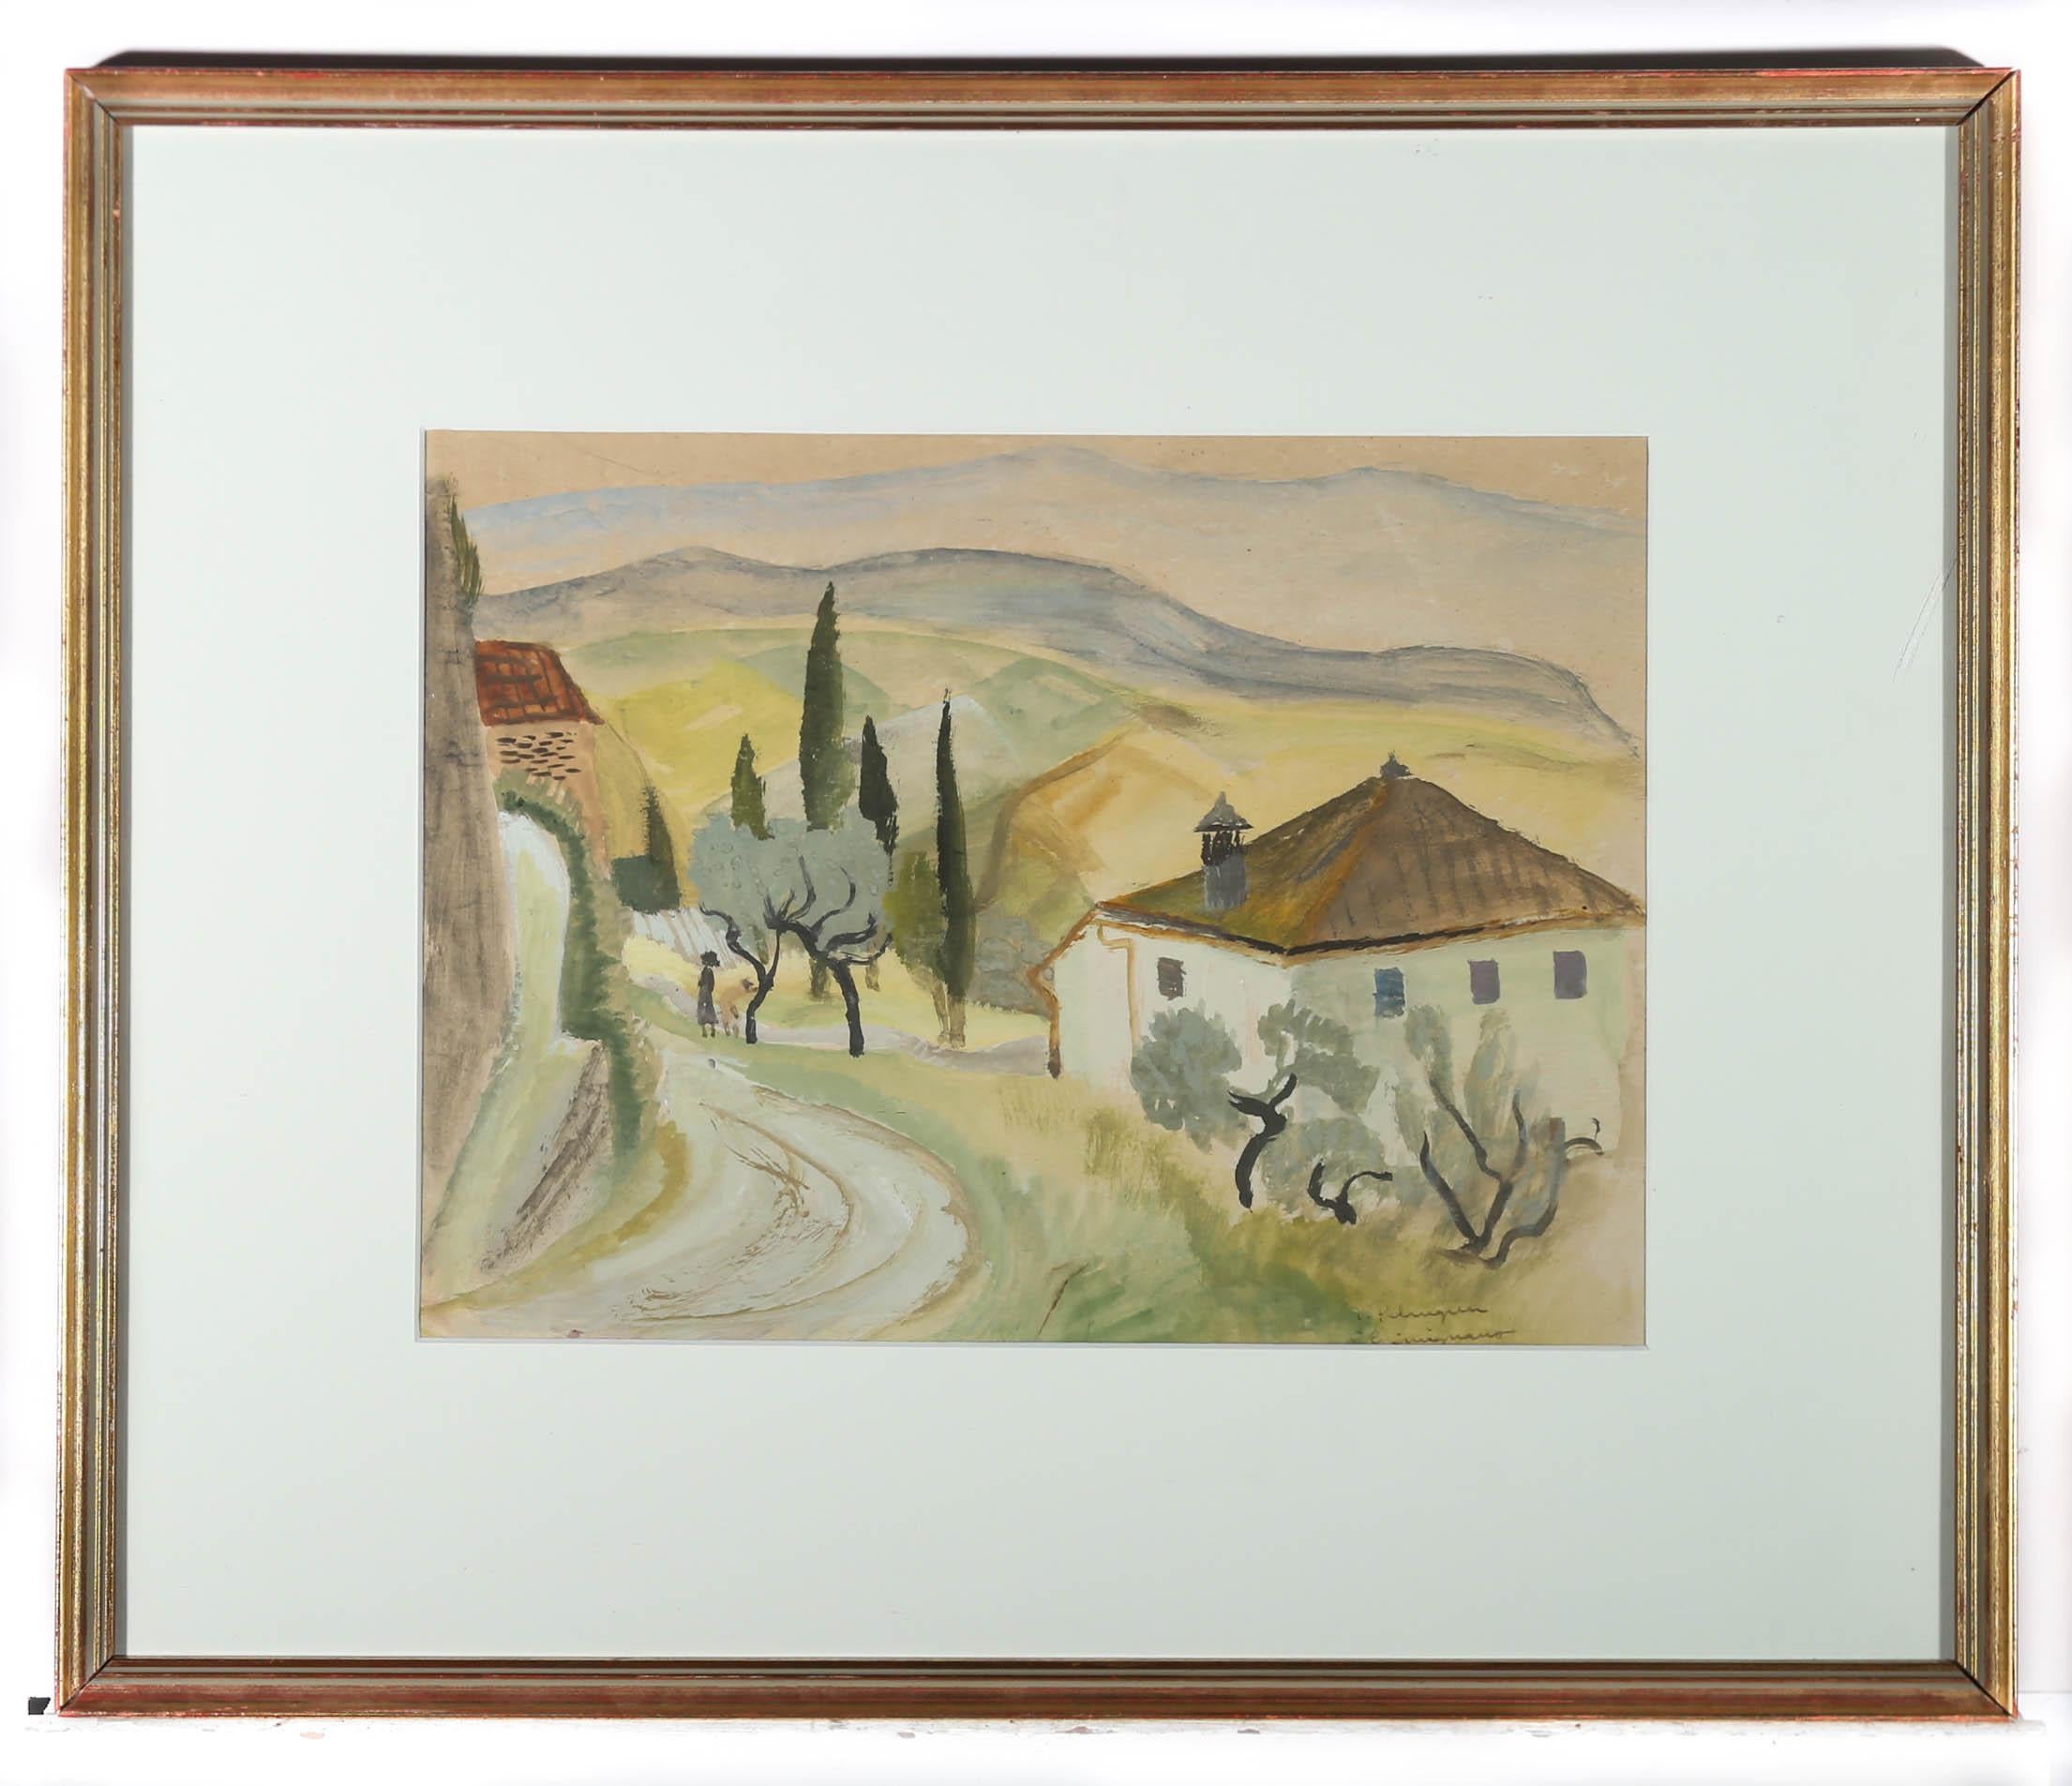 An invigorating village scene in watercolour by Scandinavian artist Inga Palmgren (1914-2008). Here Palmgren has captured a country road sweeping passed village houses and patchwork fields in a charming mid century style. Signed in graphite to the